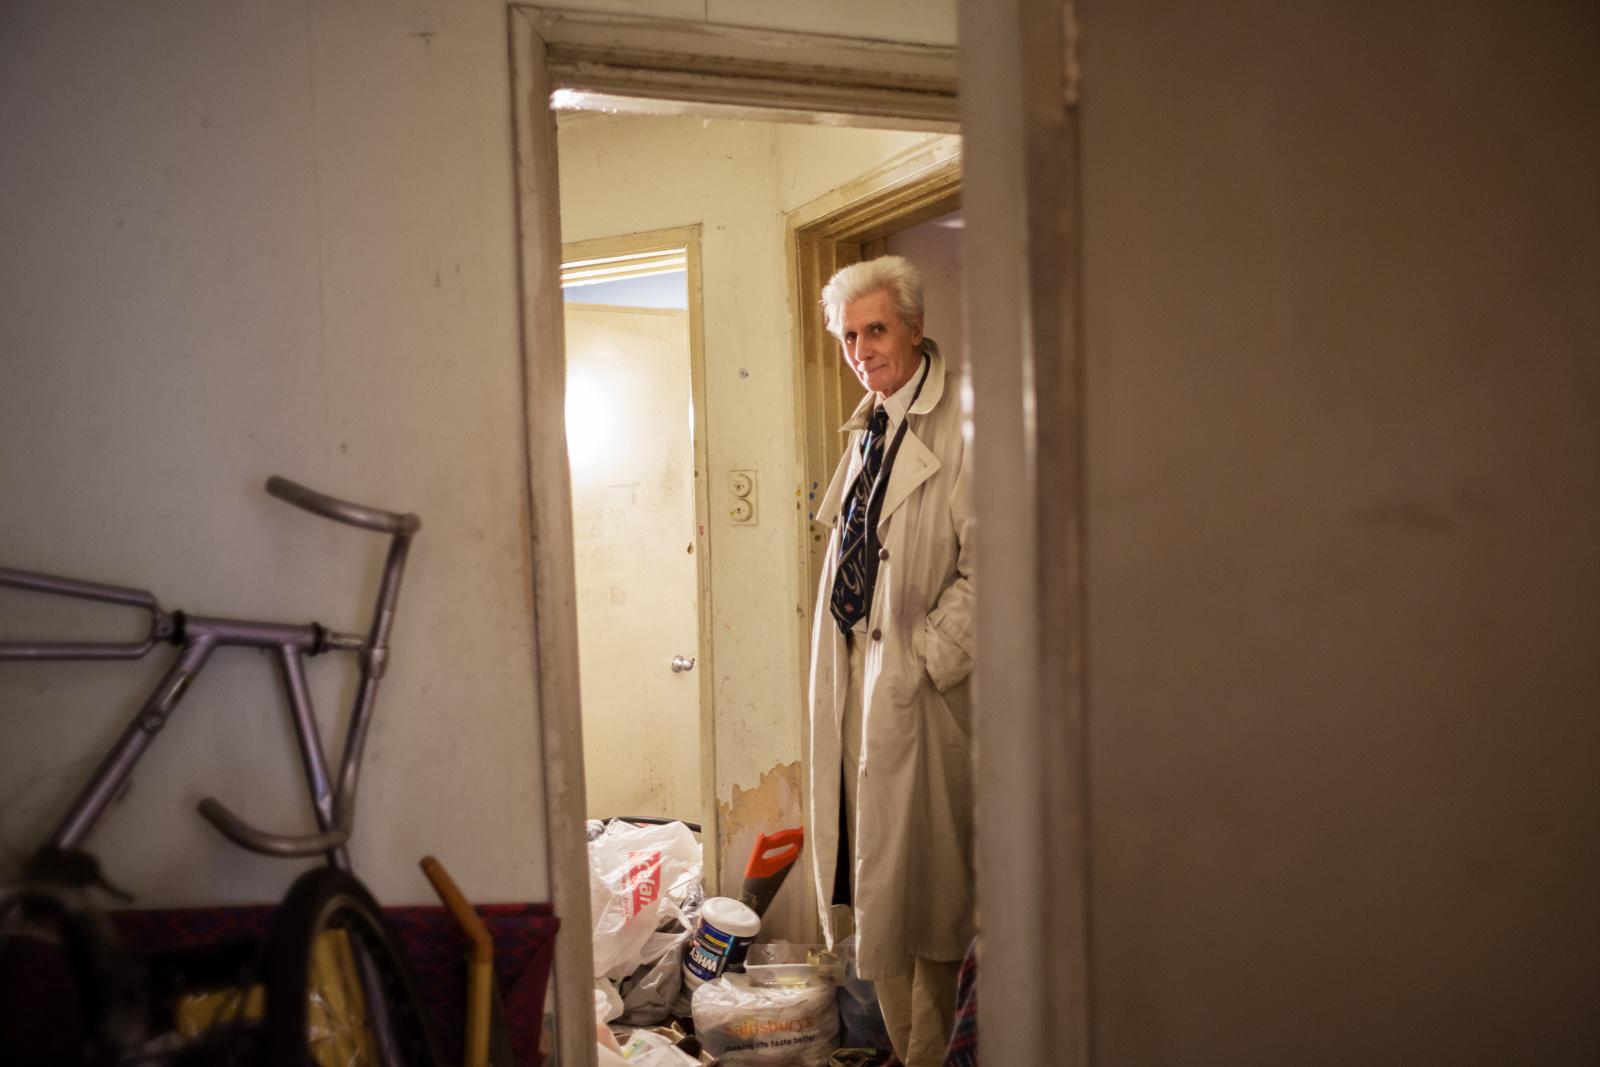 LONDON, UNITED KINGDOM - SEPTEMBER 09, 2013: George stands in his cluttered hallway, about to...